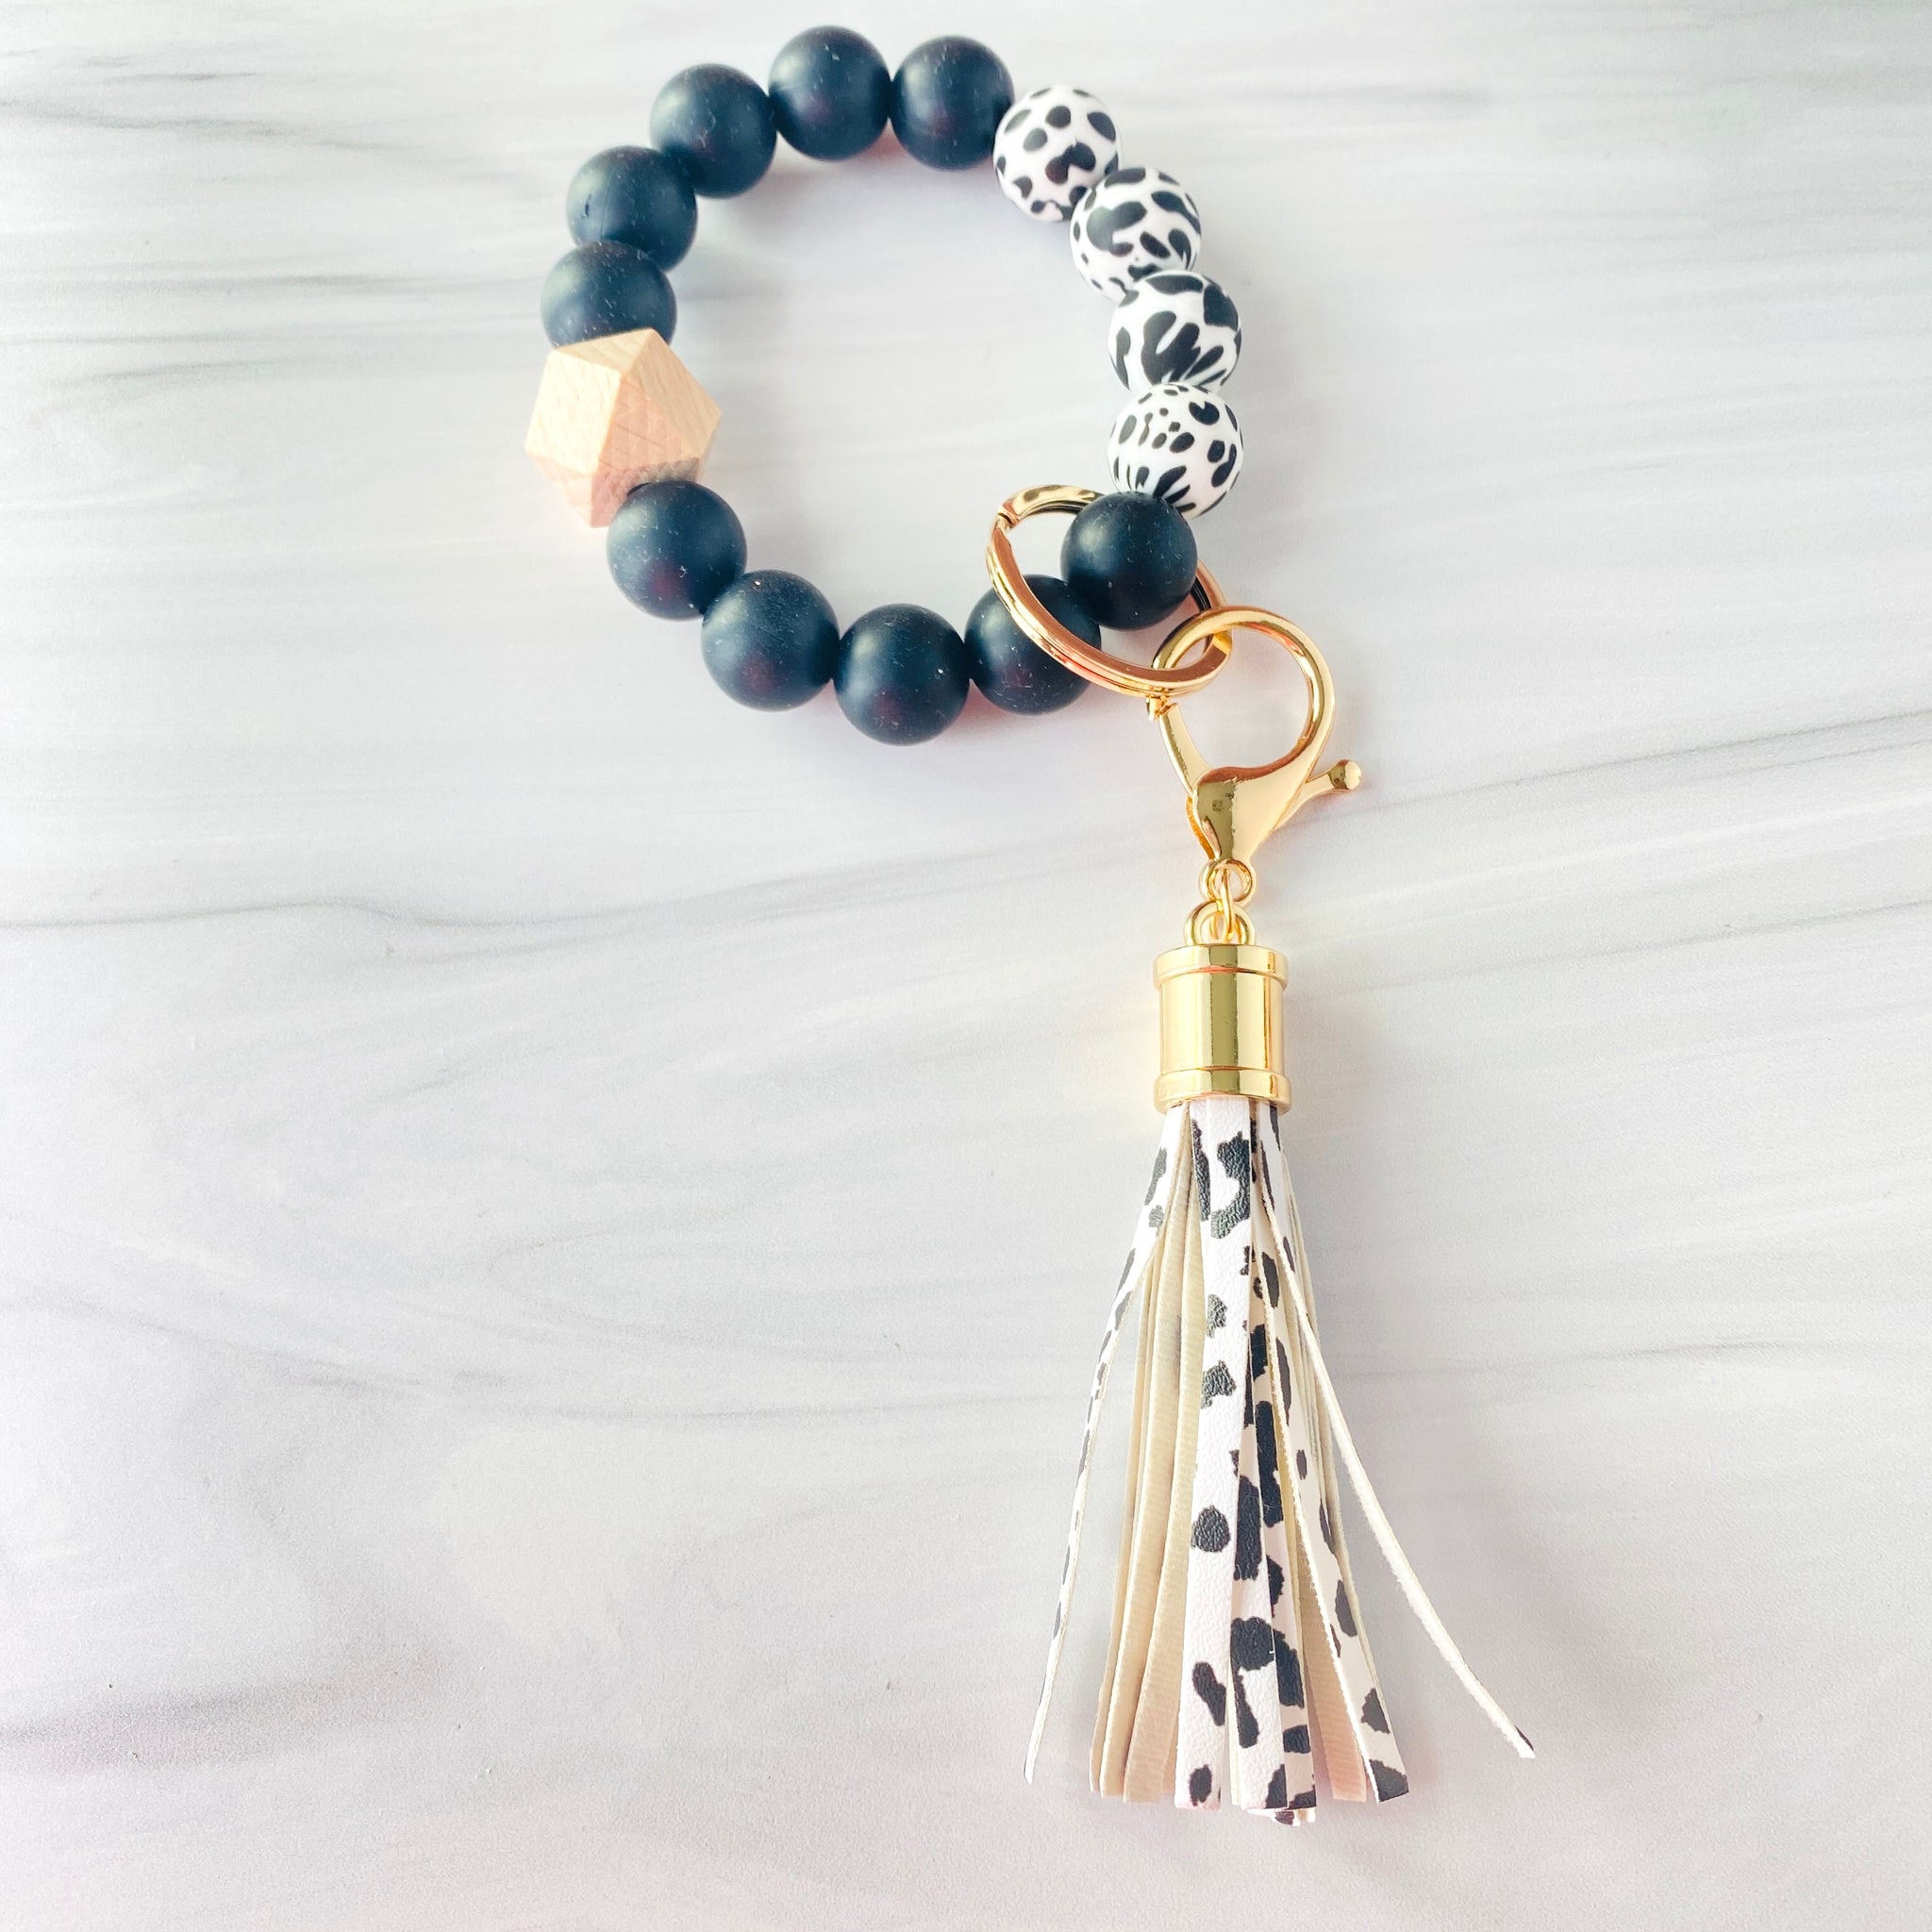 Silicone Beaded Keychain Wristlet Tutorial » The Denver Housewife